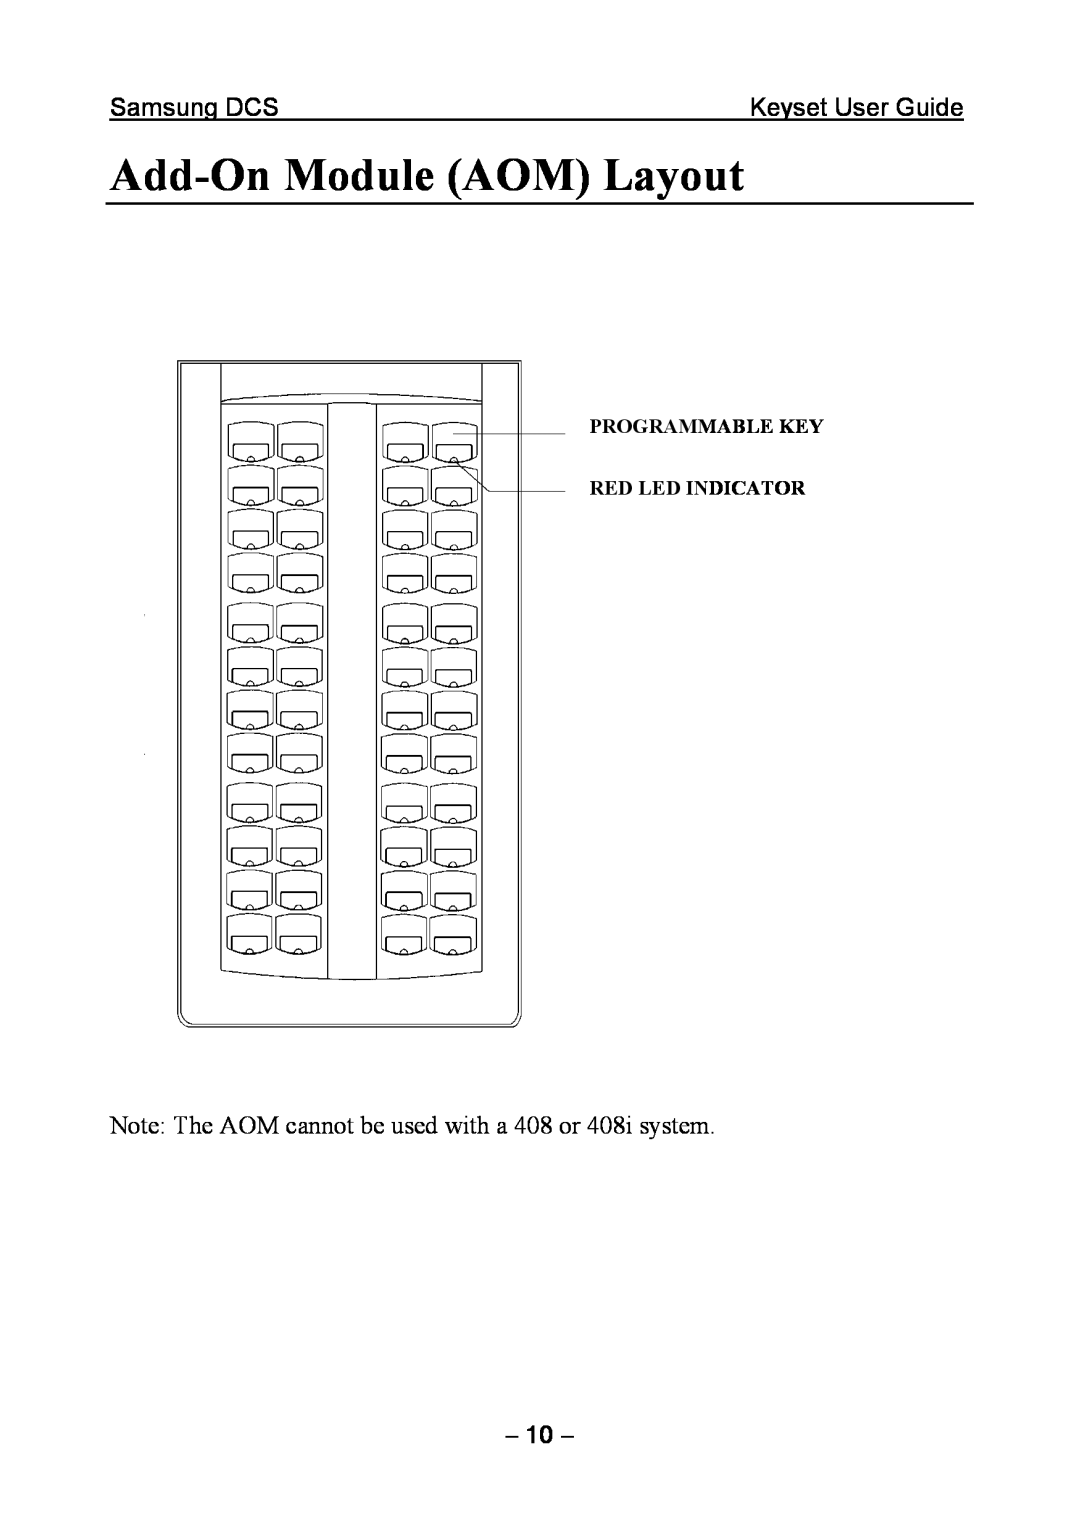 Samsung DCS KEYSET manual Add-On Module AOM Layout, Note The AOM cannot be used with a 408 or 408i system 